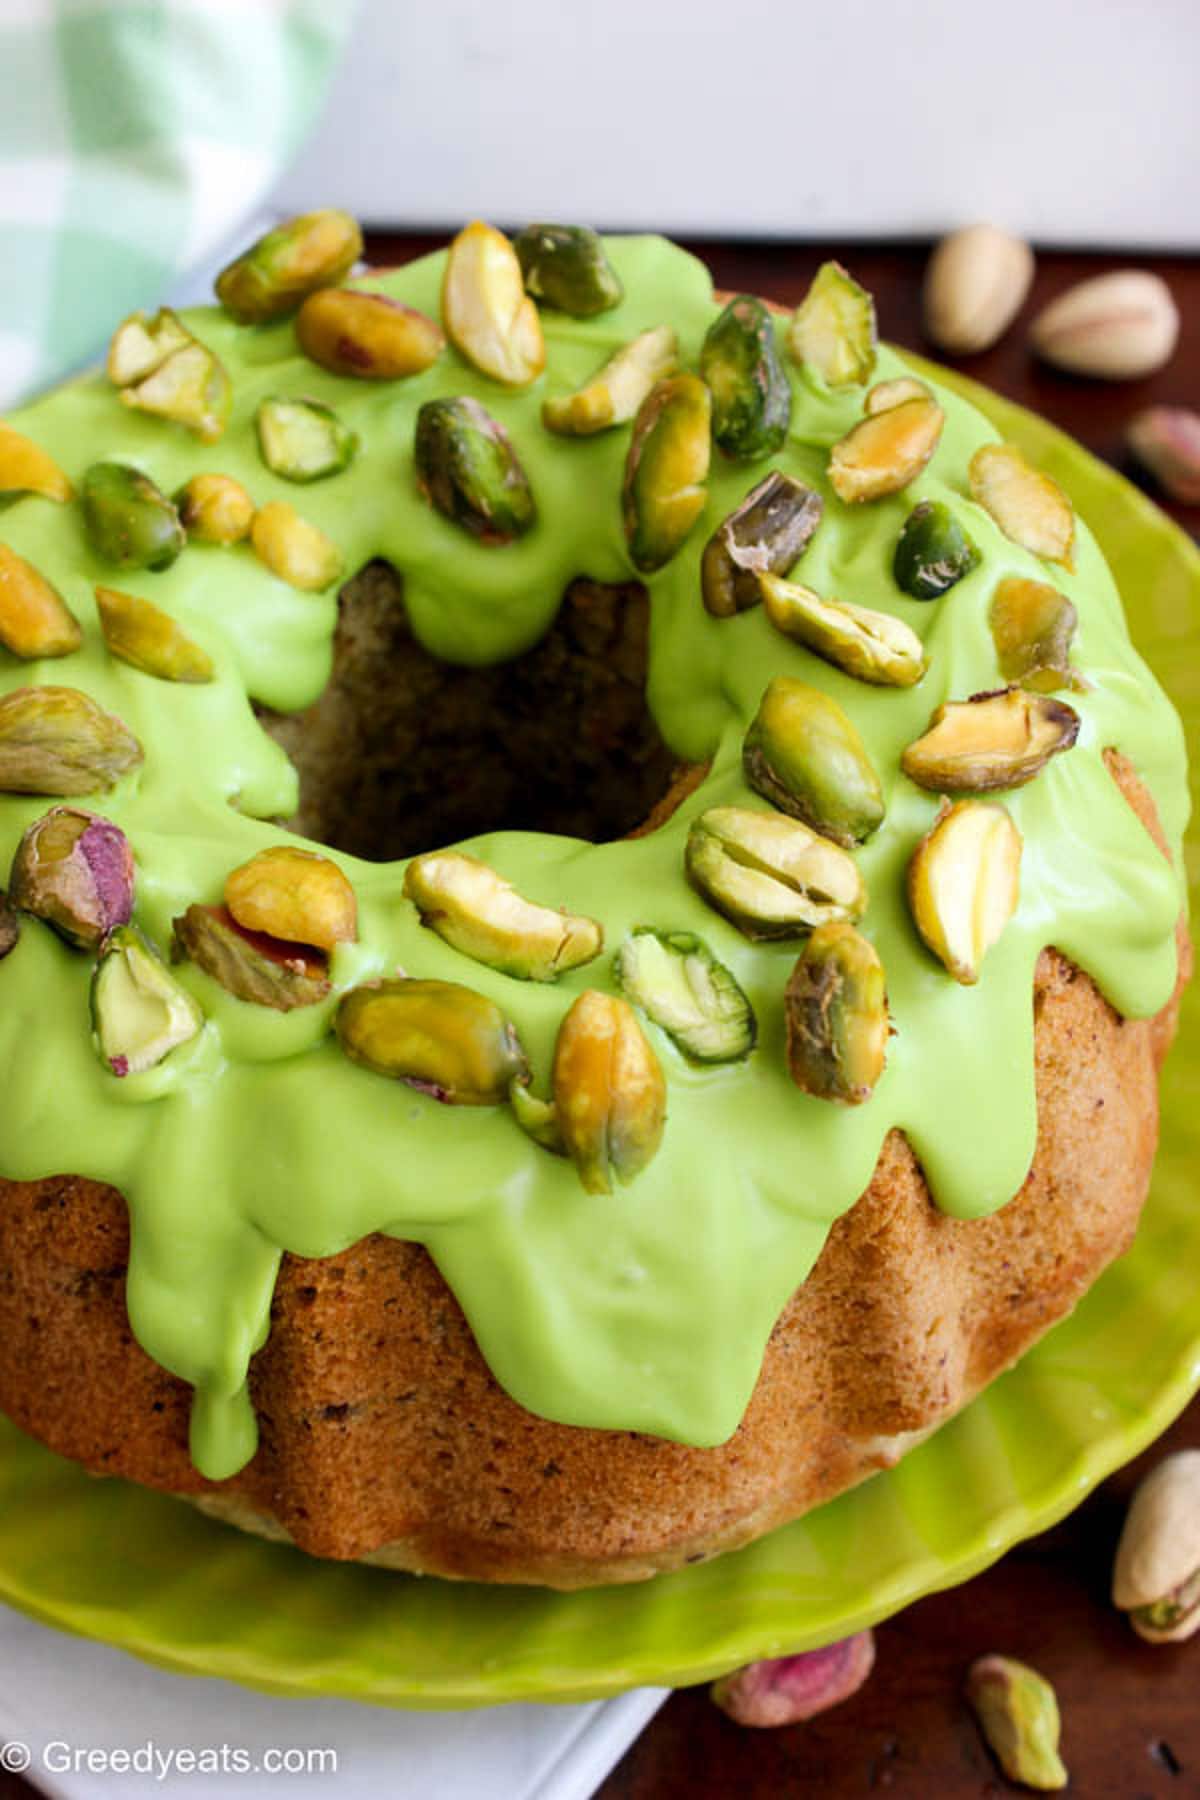 Pistachio bundt cake made in a small bundt pan, topped with light green candy melts topping.